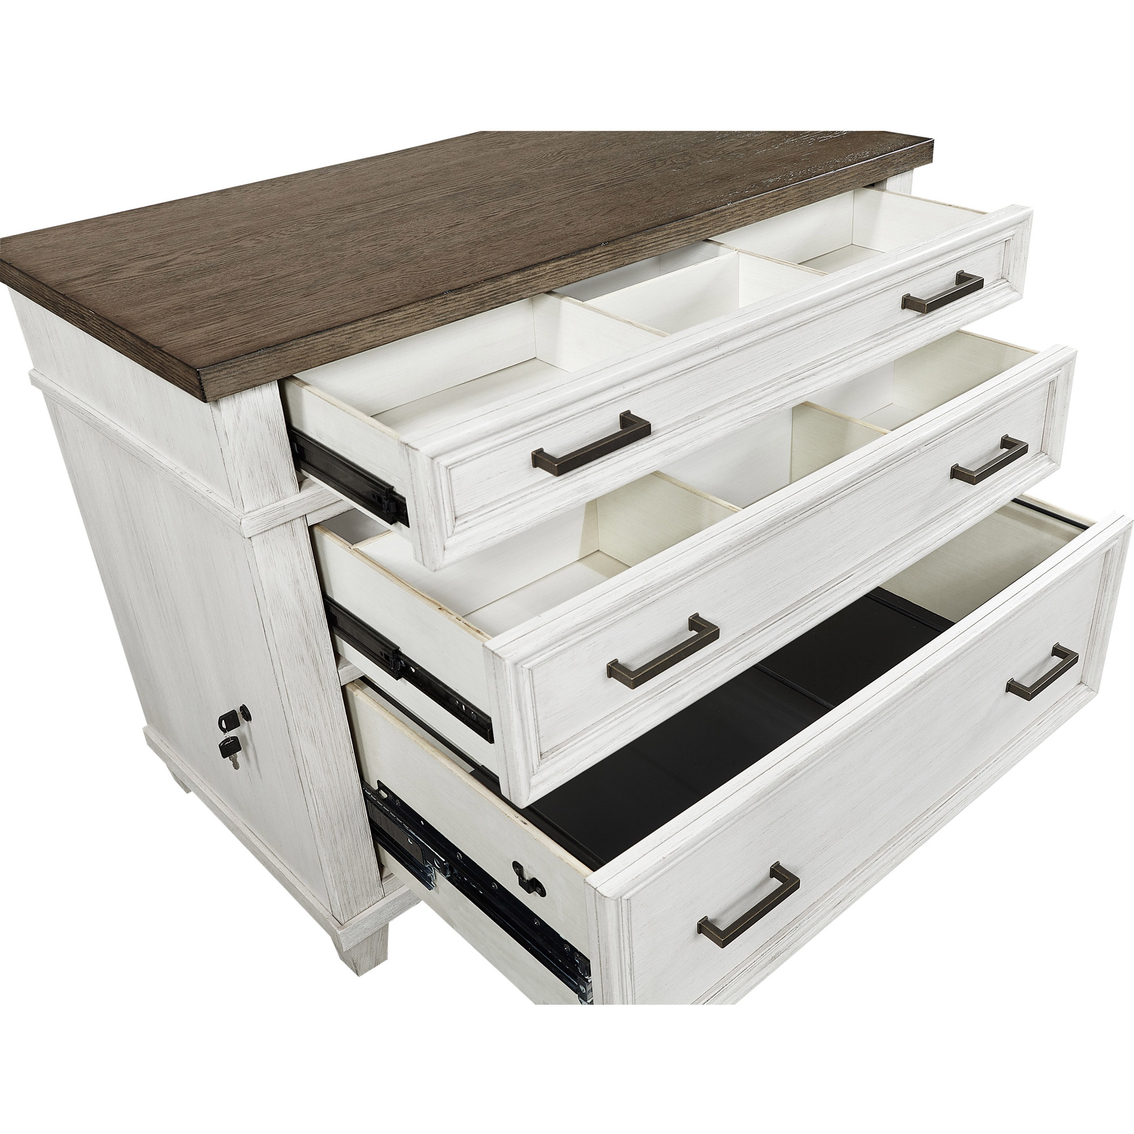 Aspenhome Caraway Lateral File Cabinet - Image 2 of 5